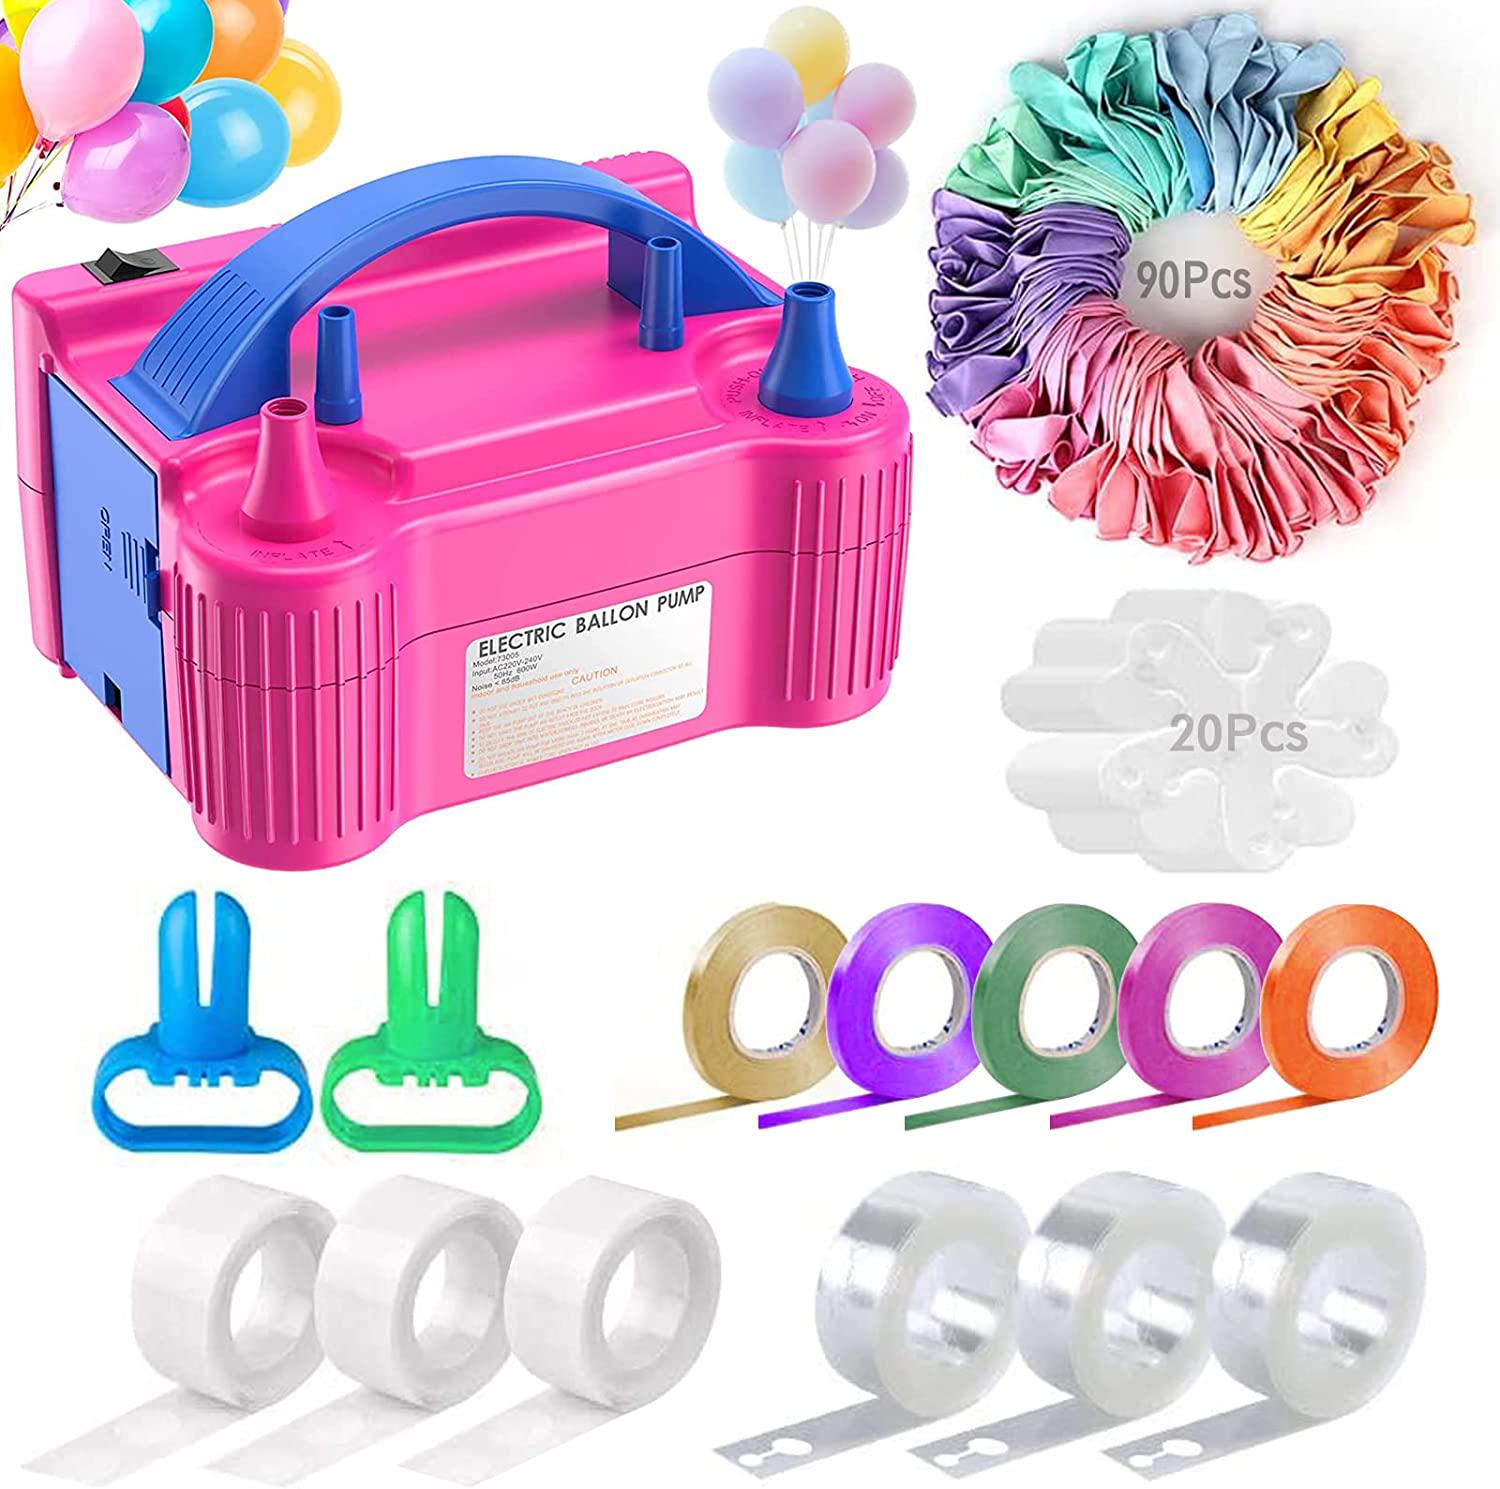 Atcdmlu, Electric Air Balloon Pump, Portable Balloon Inflator with 90 PCS Macaron Balloons, Tying Tools, 20 Flower Clips, Tape Strip and Dot Glues Balloon Blower for Garland Party Birthday Wedding Decorations